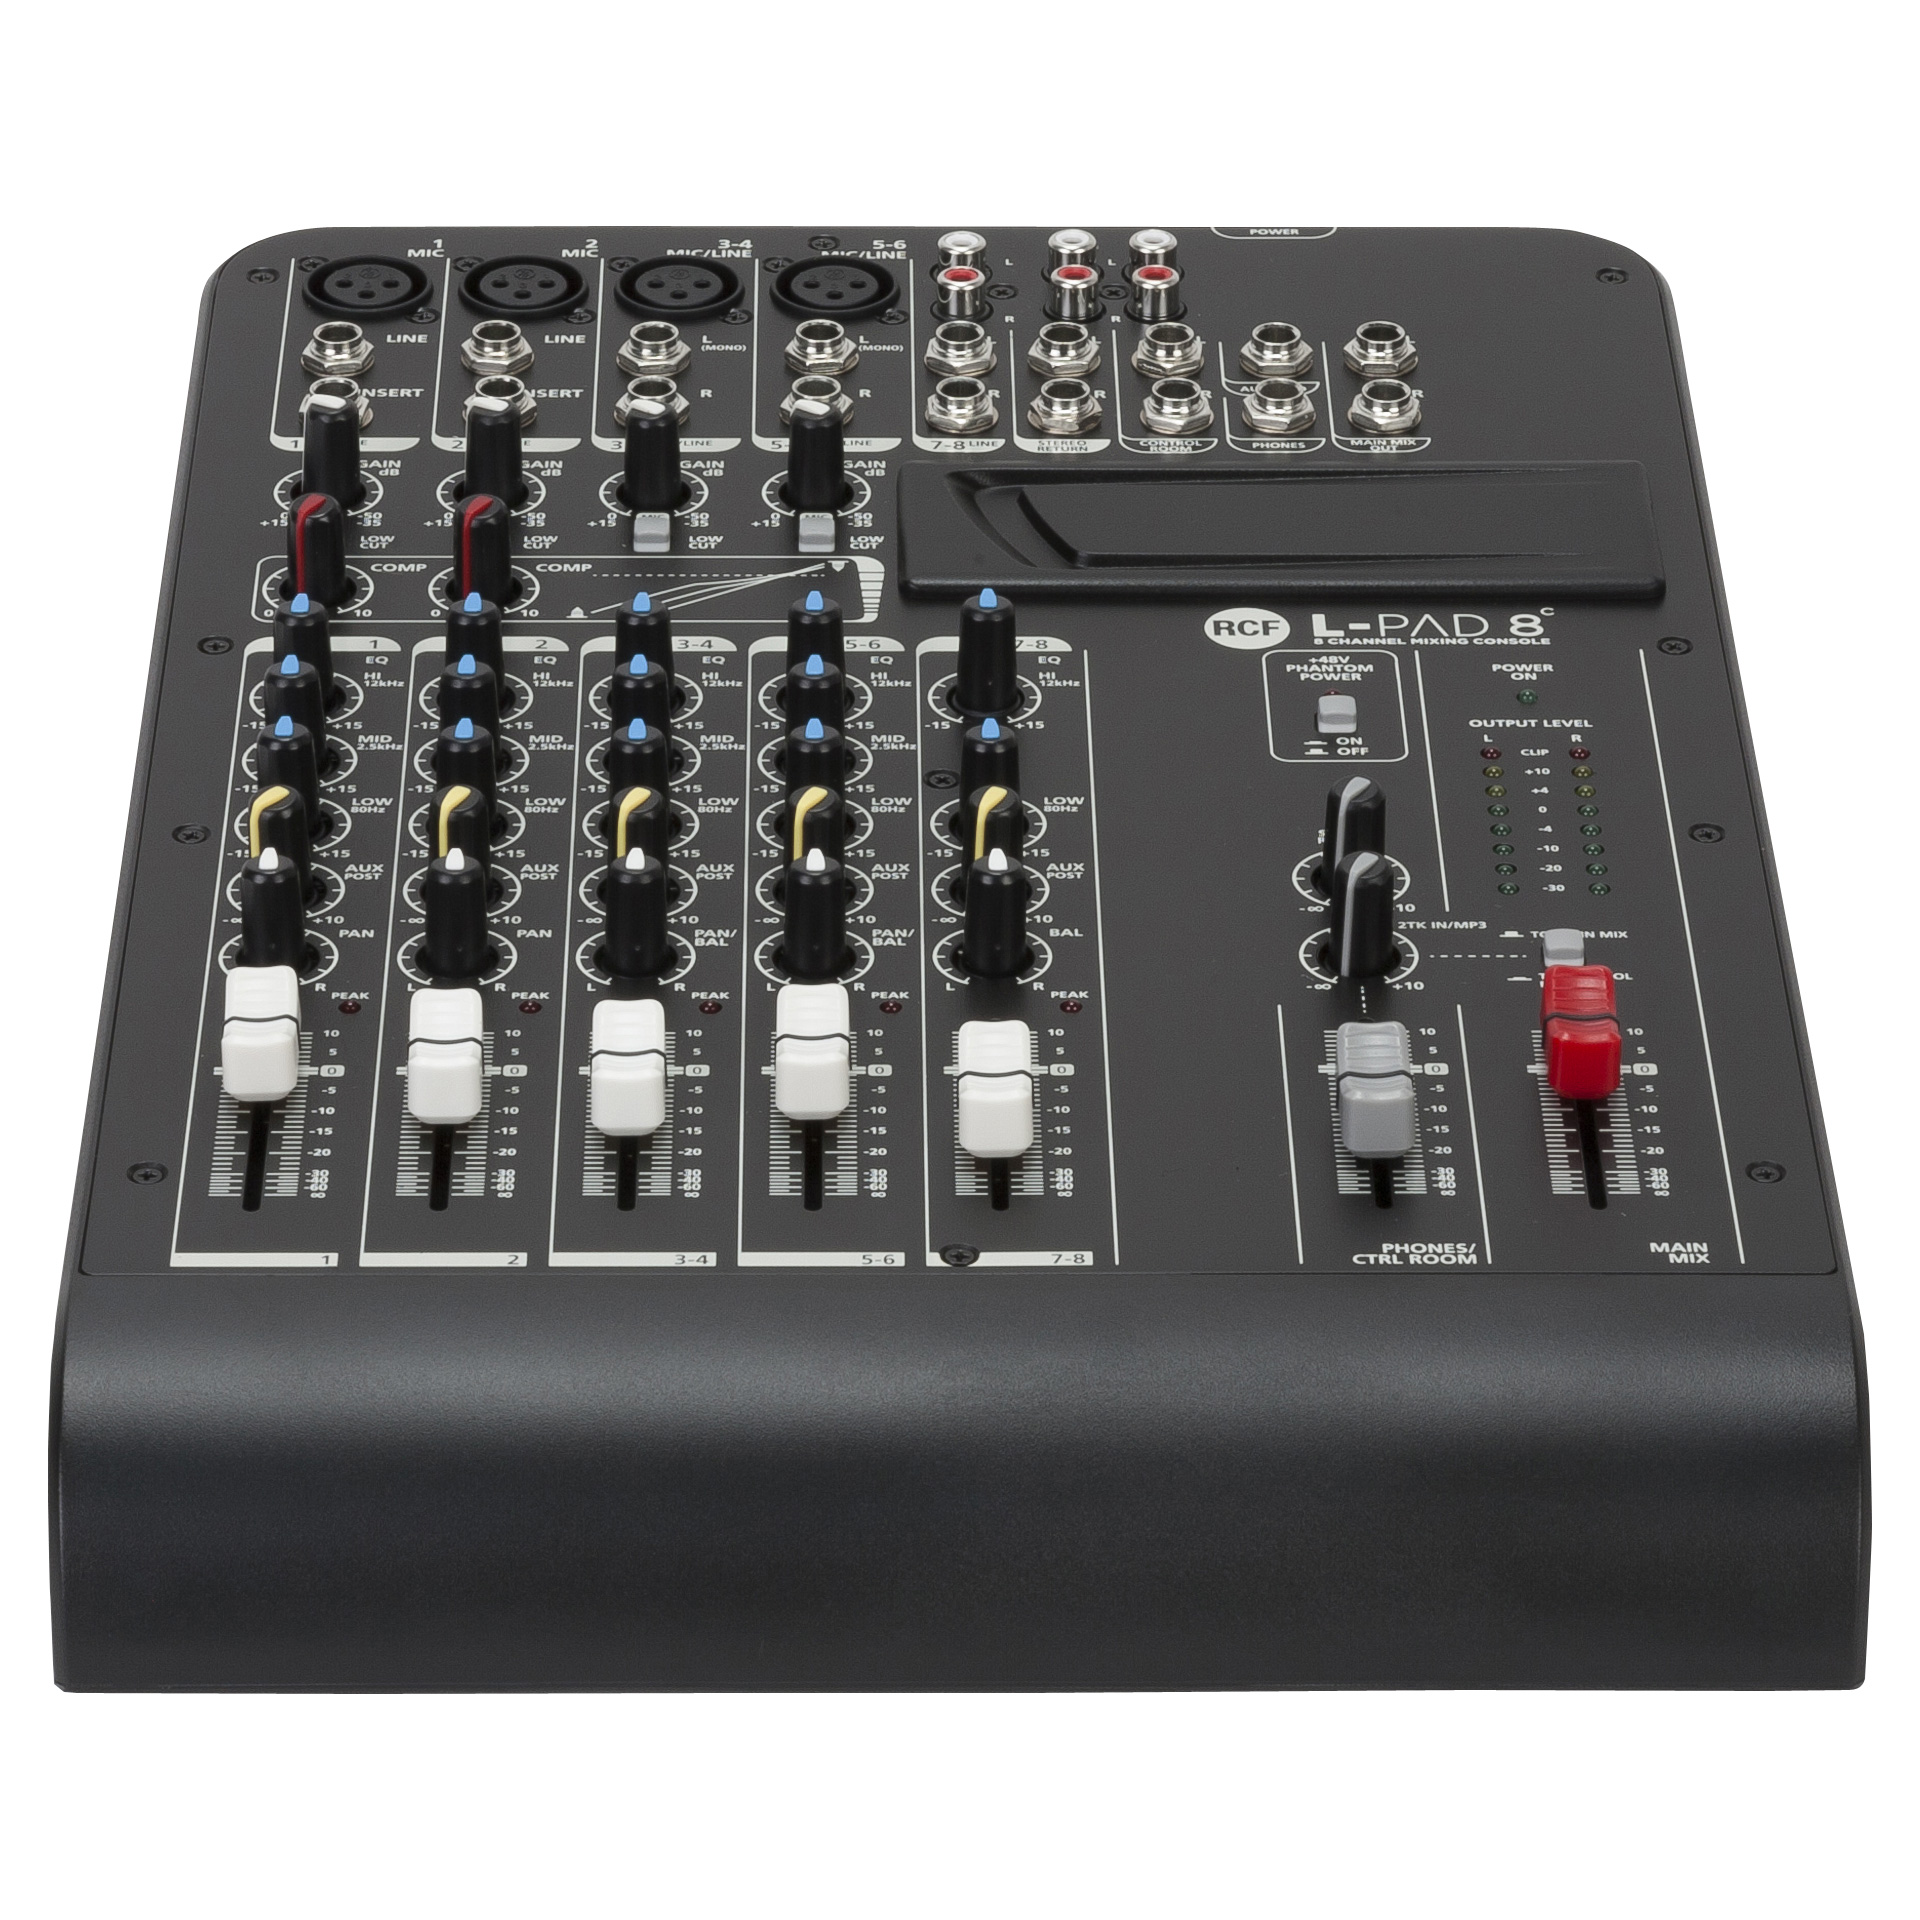 L-PAD 8C 8 CHANNEL MIXING CONSOLE